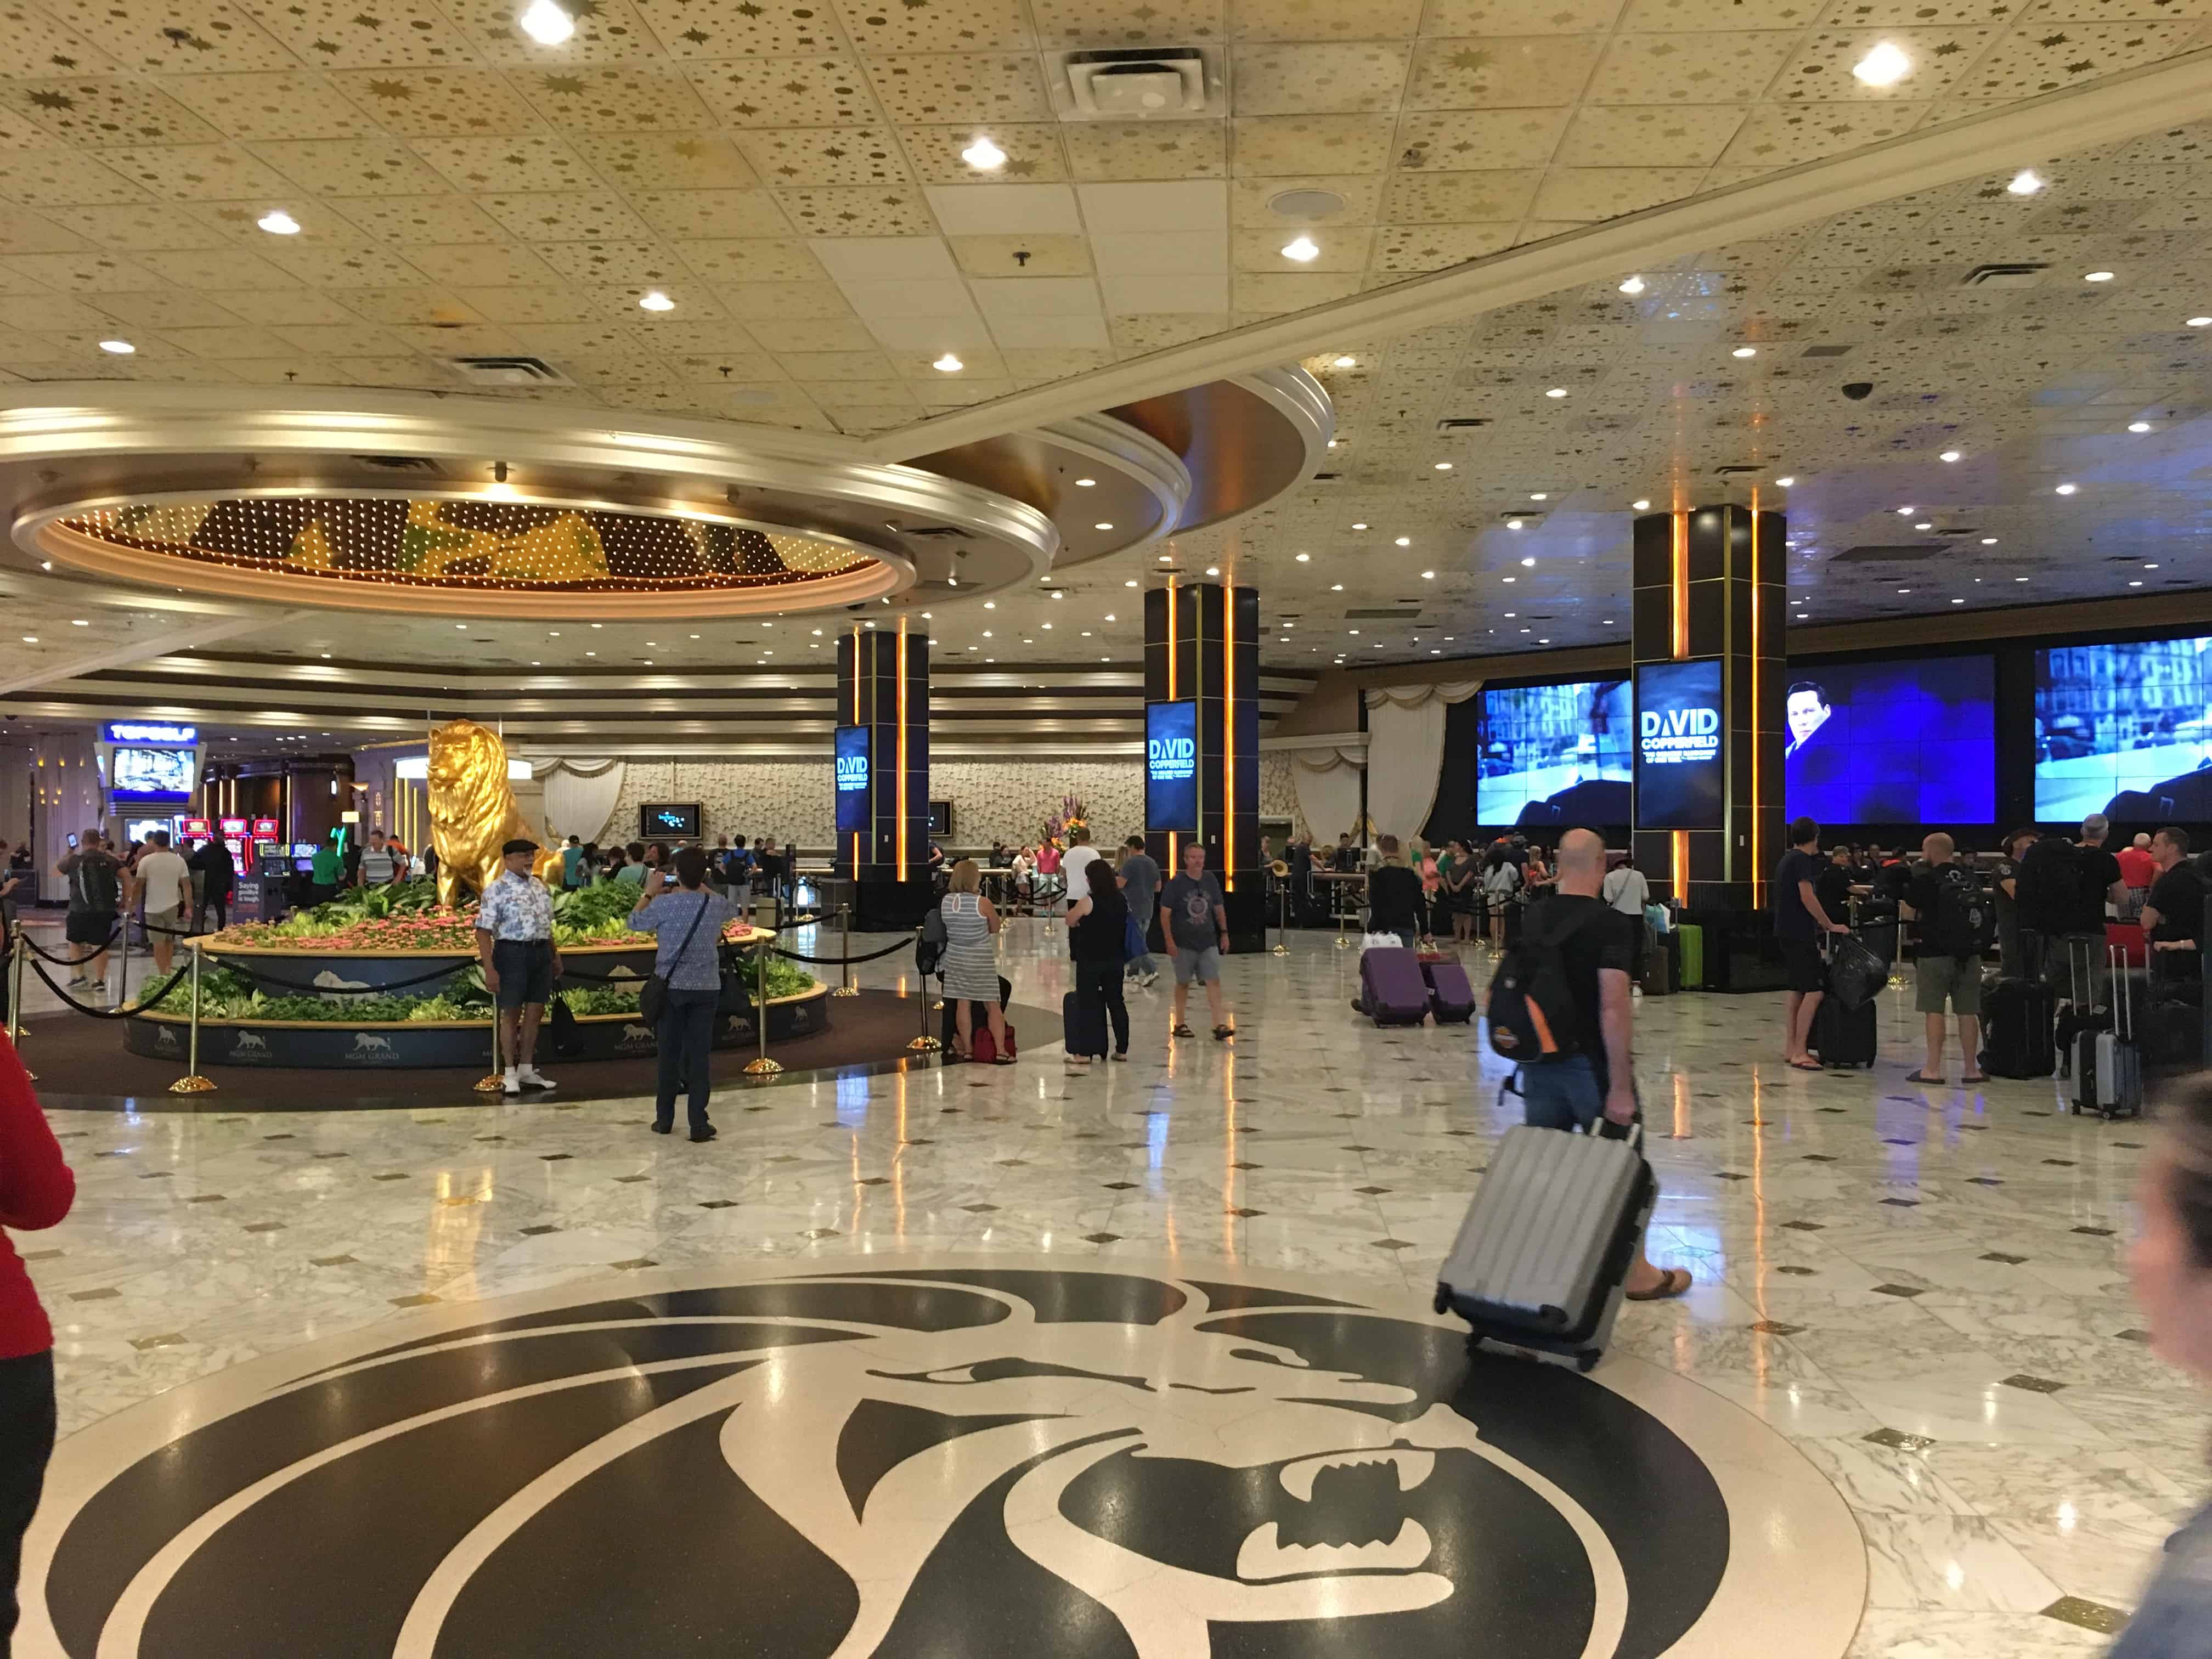 Lobby at the MGM Grand in Las Vegas, Nevada